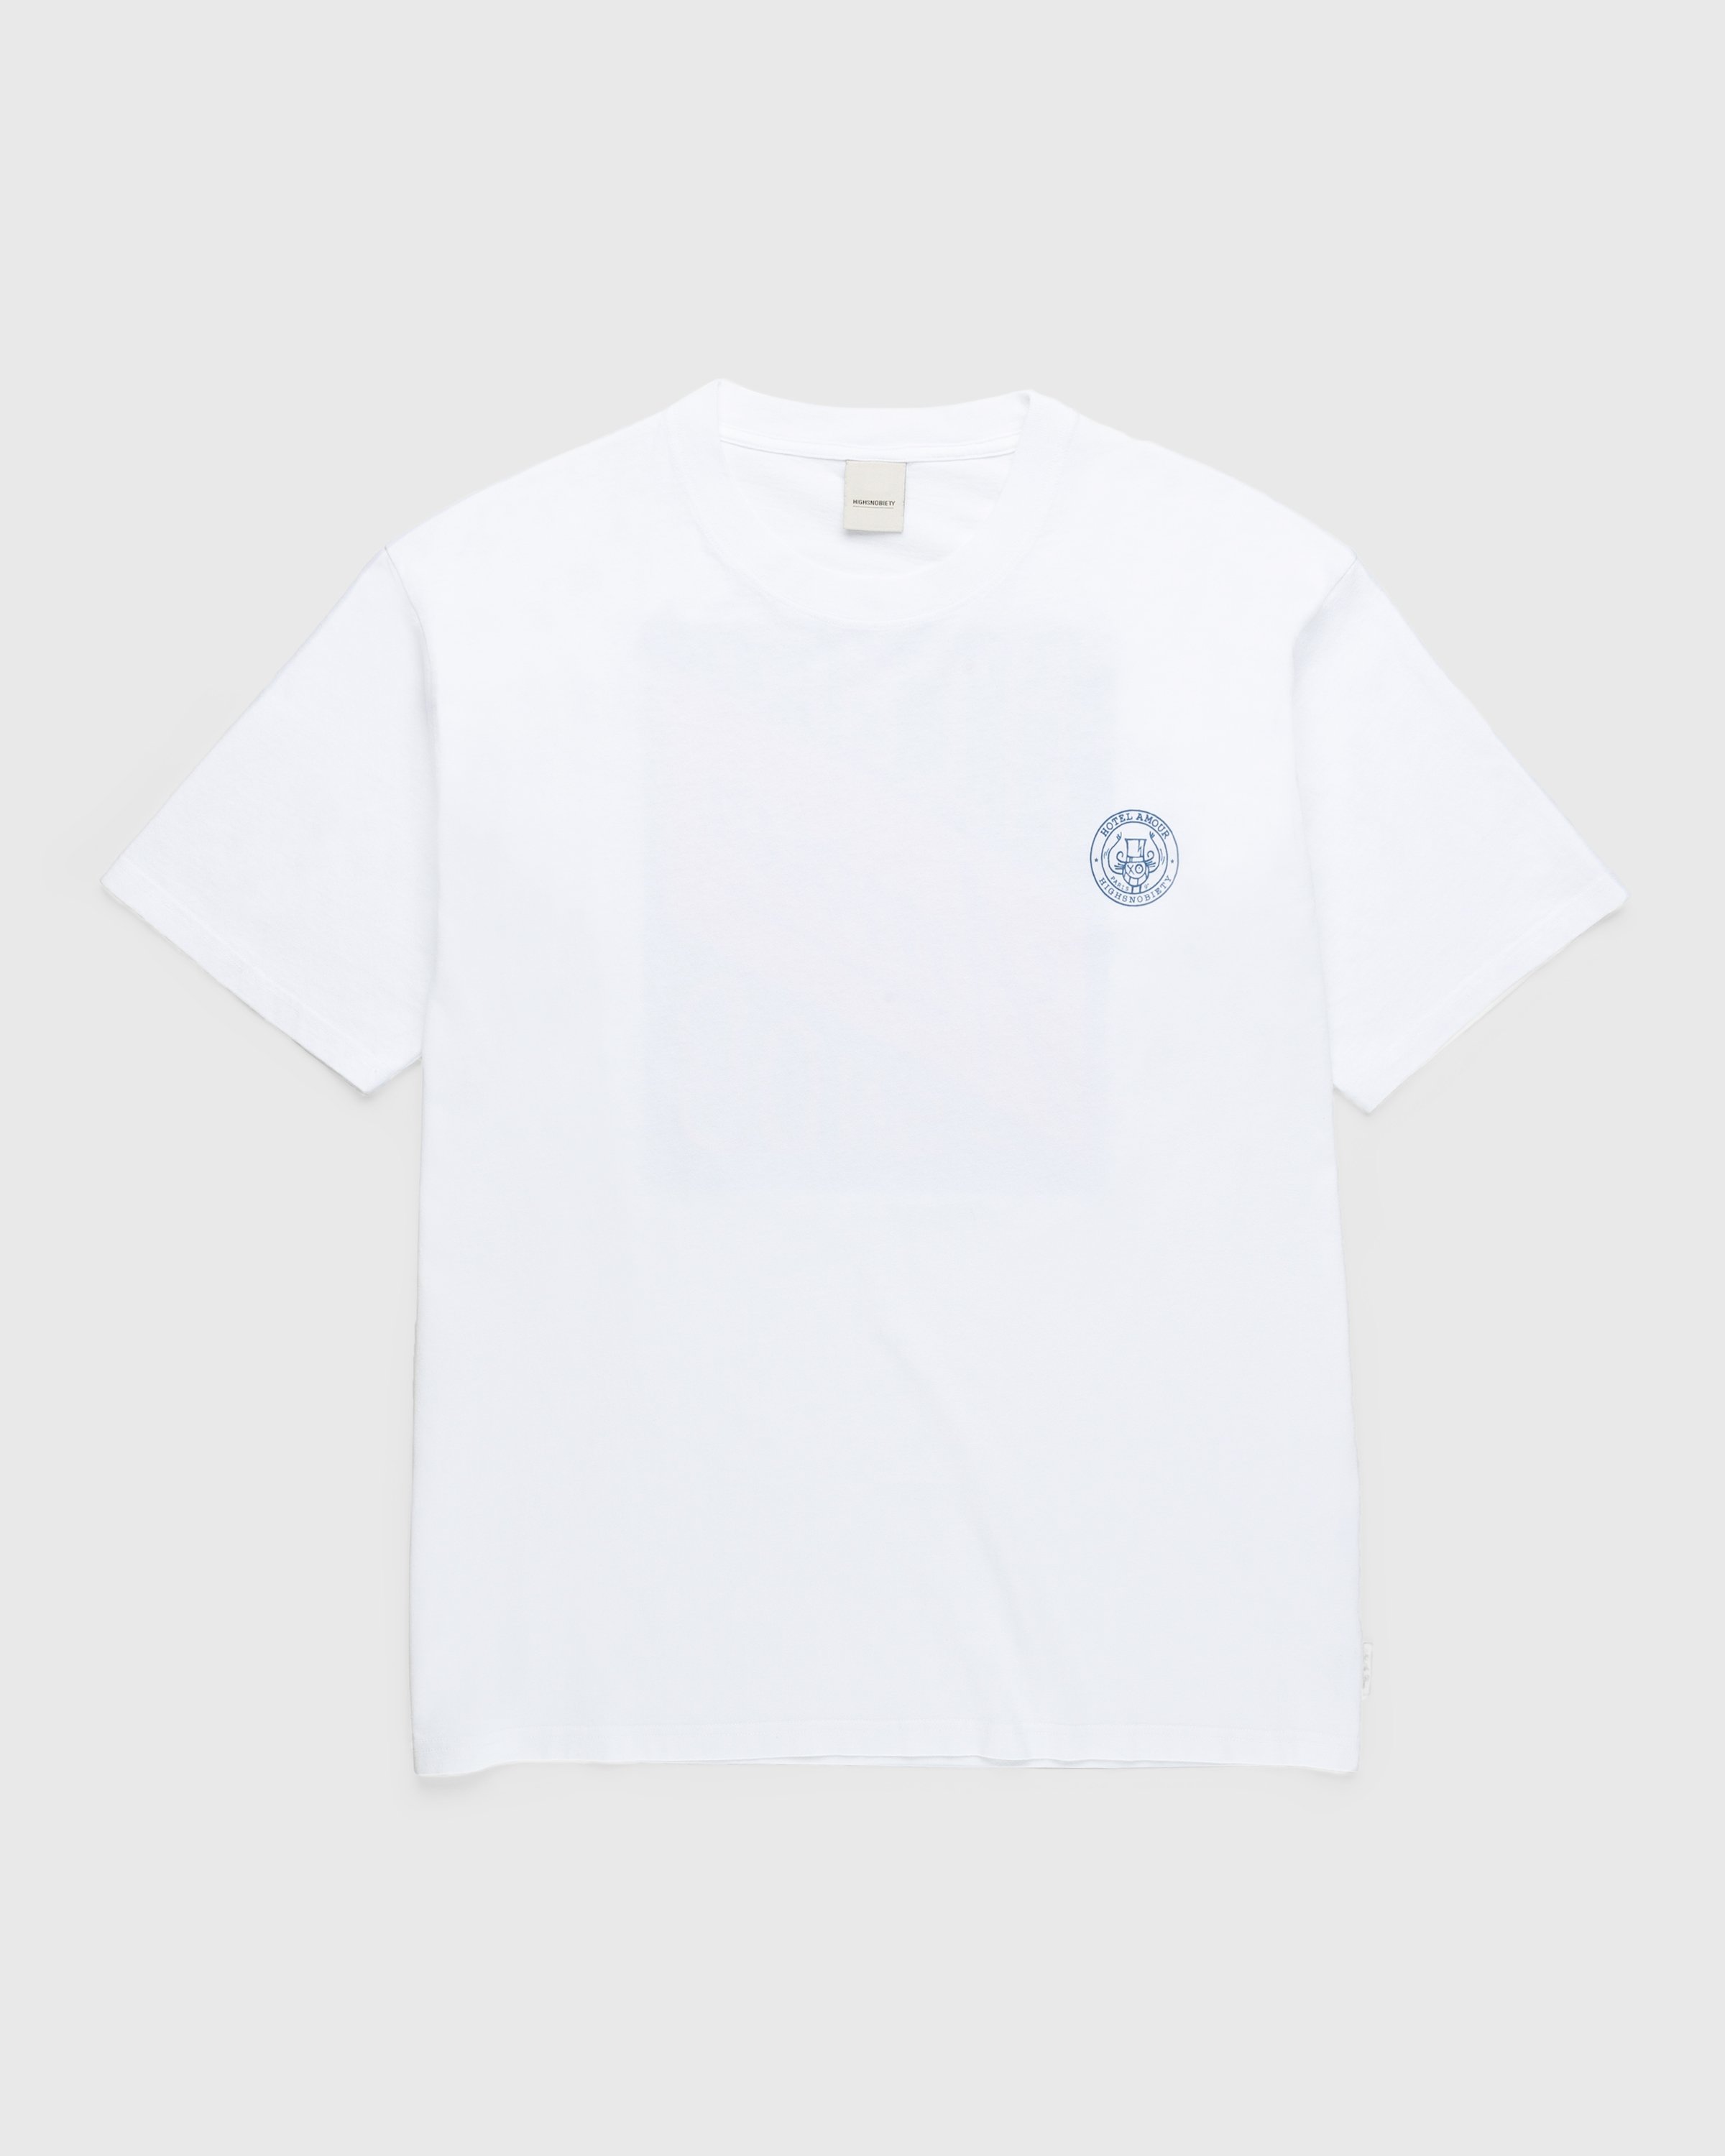 Hotel Amour x Highsnobiety - Not In Paris 4 T-Shirt White - Clothing - White - Image 2